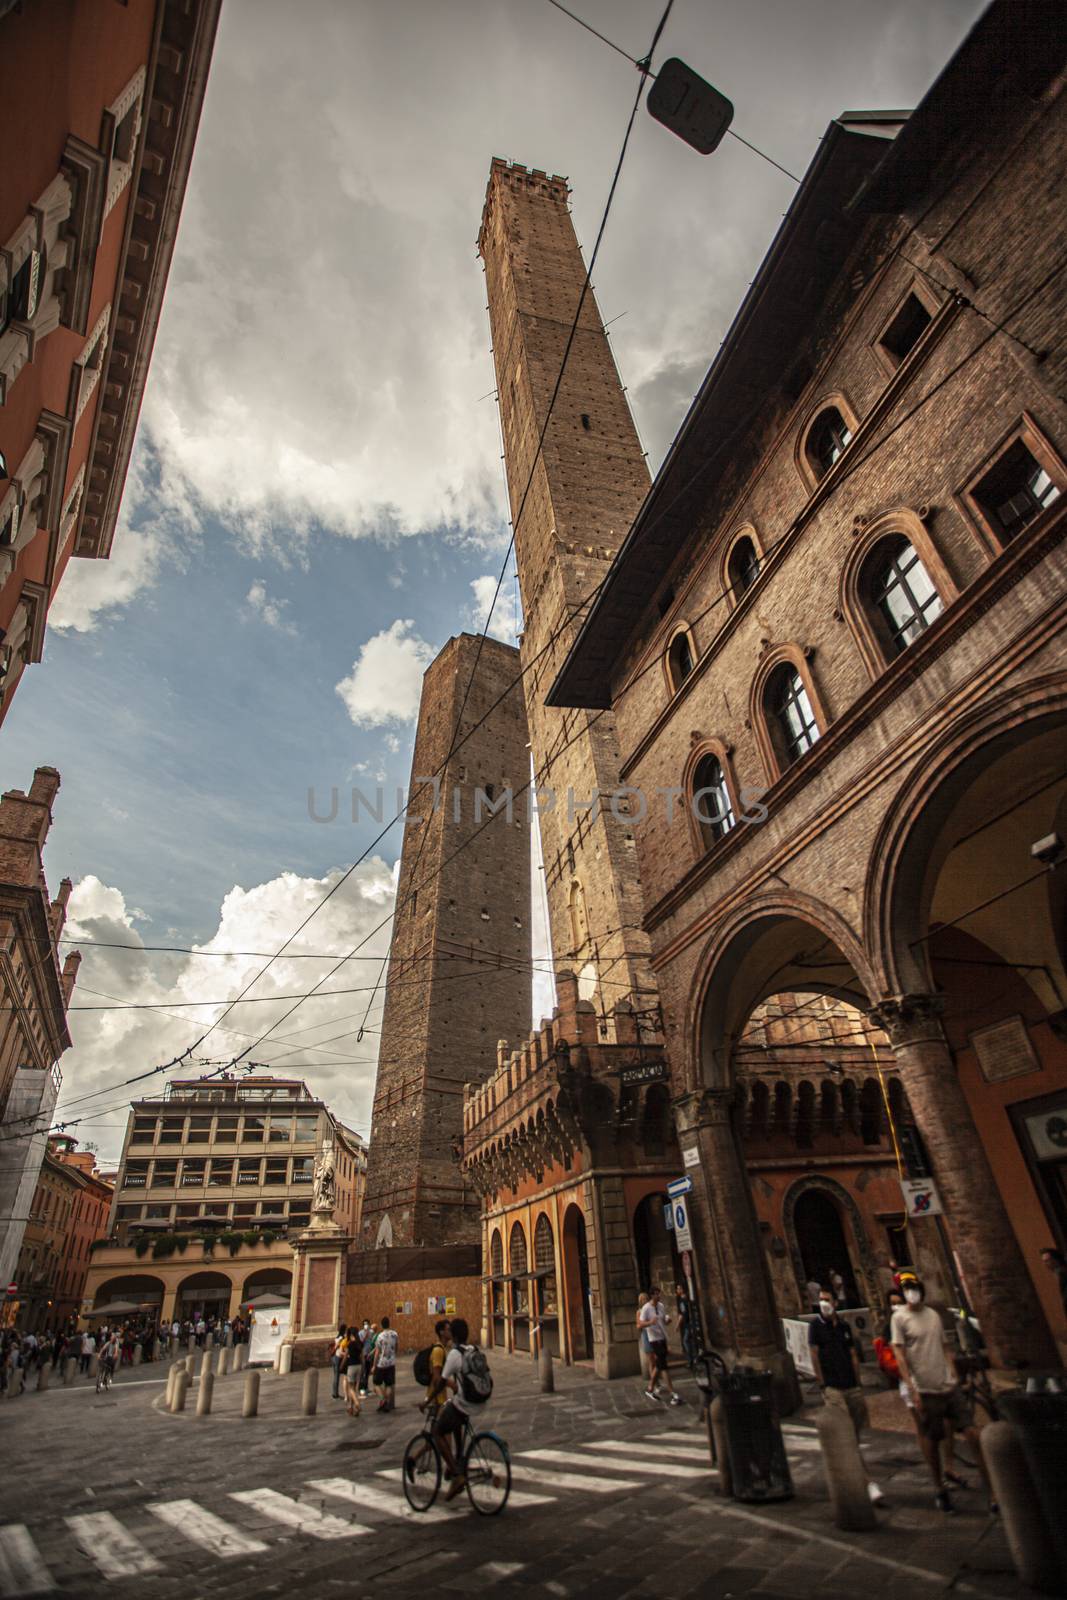 Asinelli tower in Bologna, Italy 10 by pippocarlot